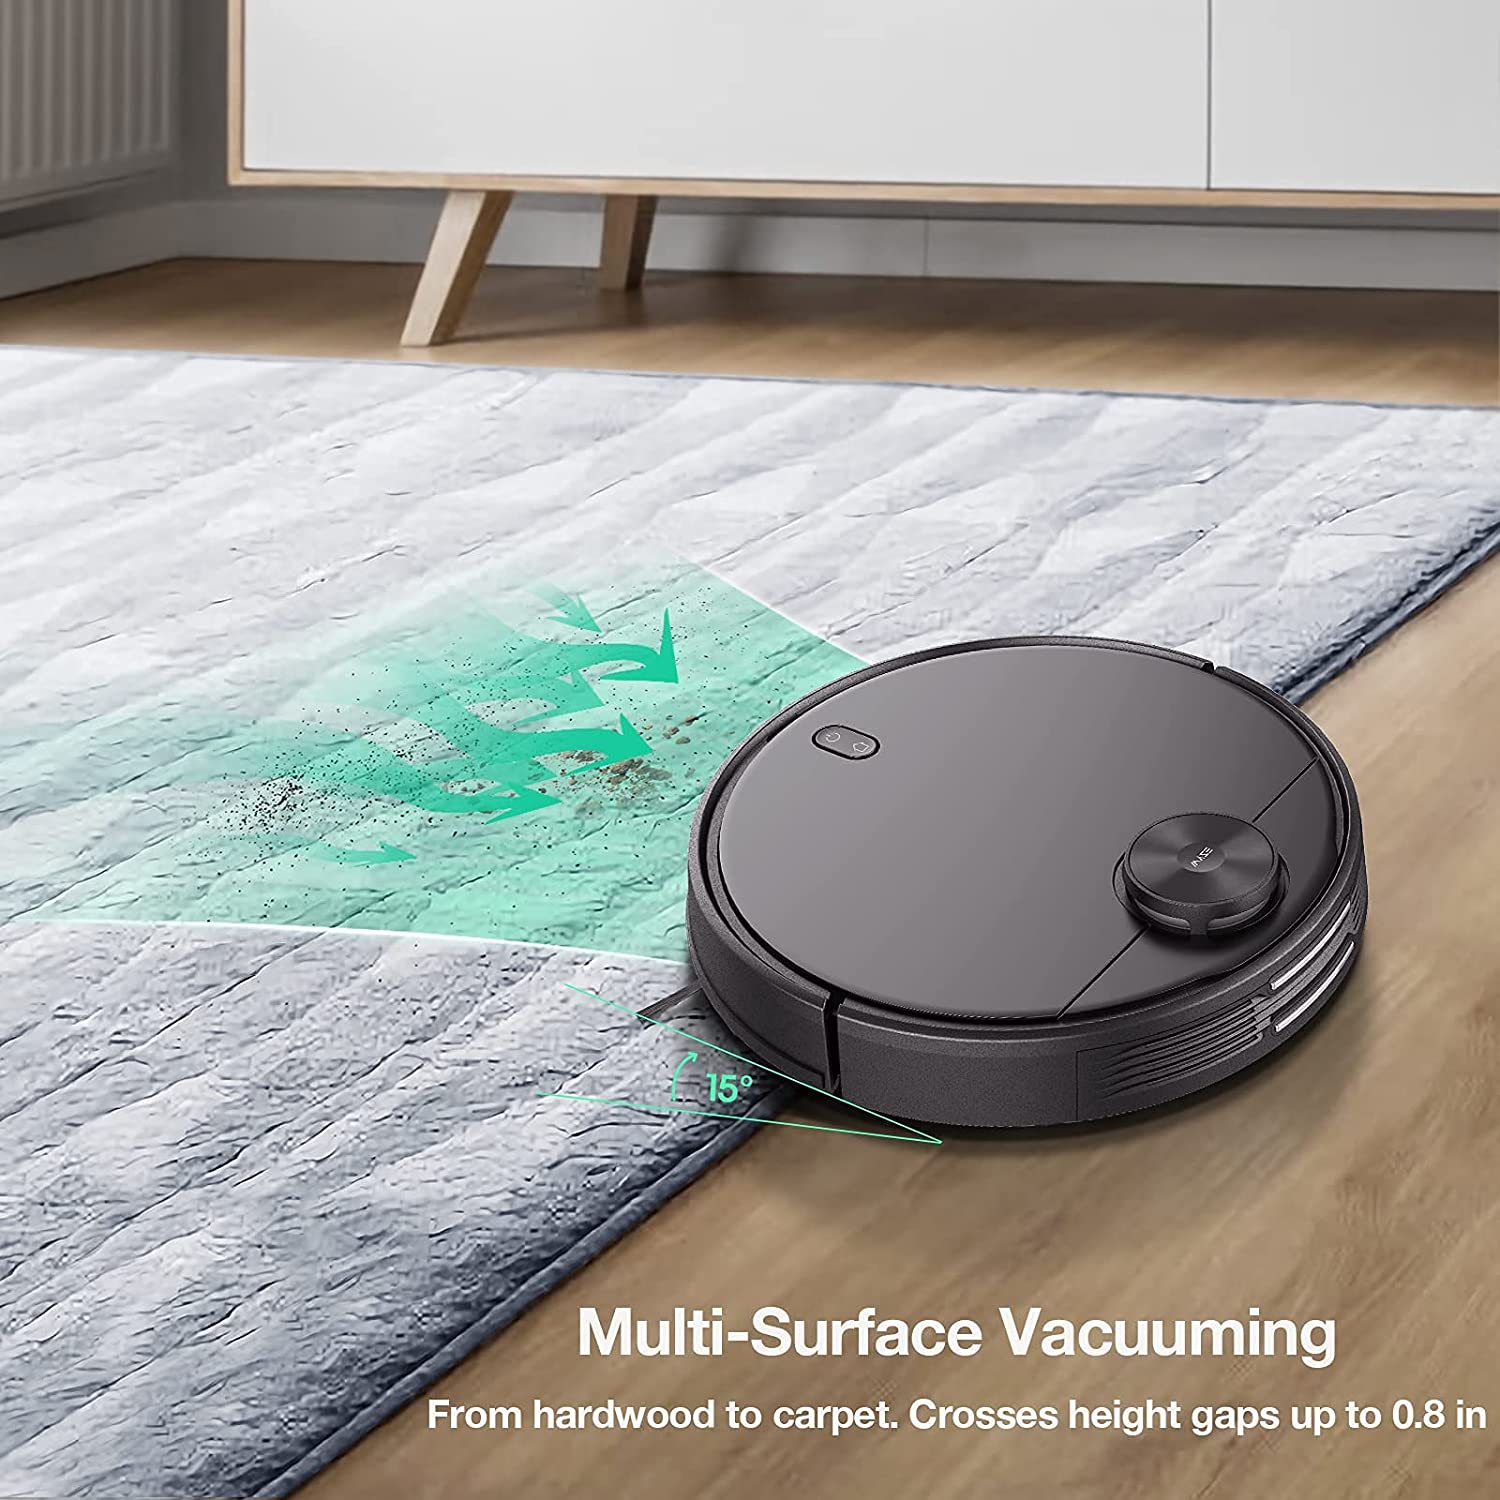 Ecovacs Deebot T8 robot vacuum review: multi-function mopping and sweeping  with superb accessories